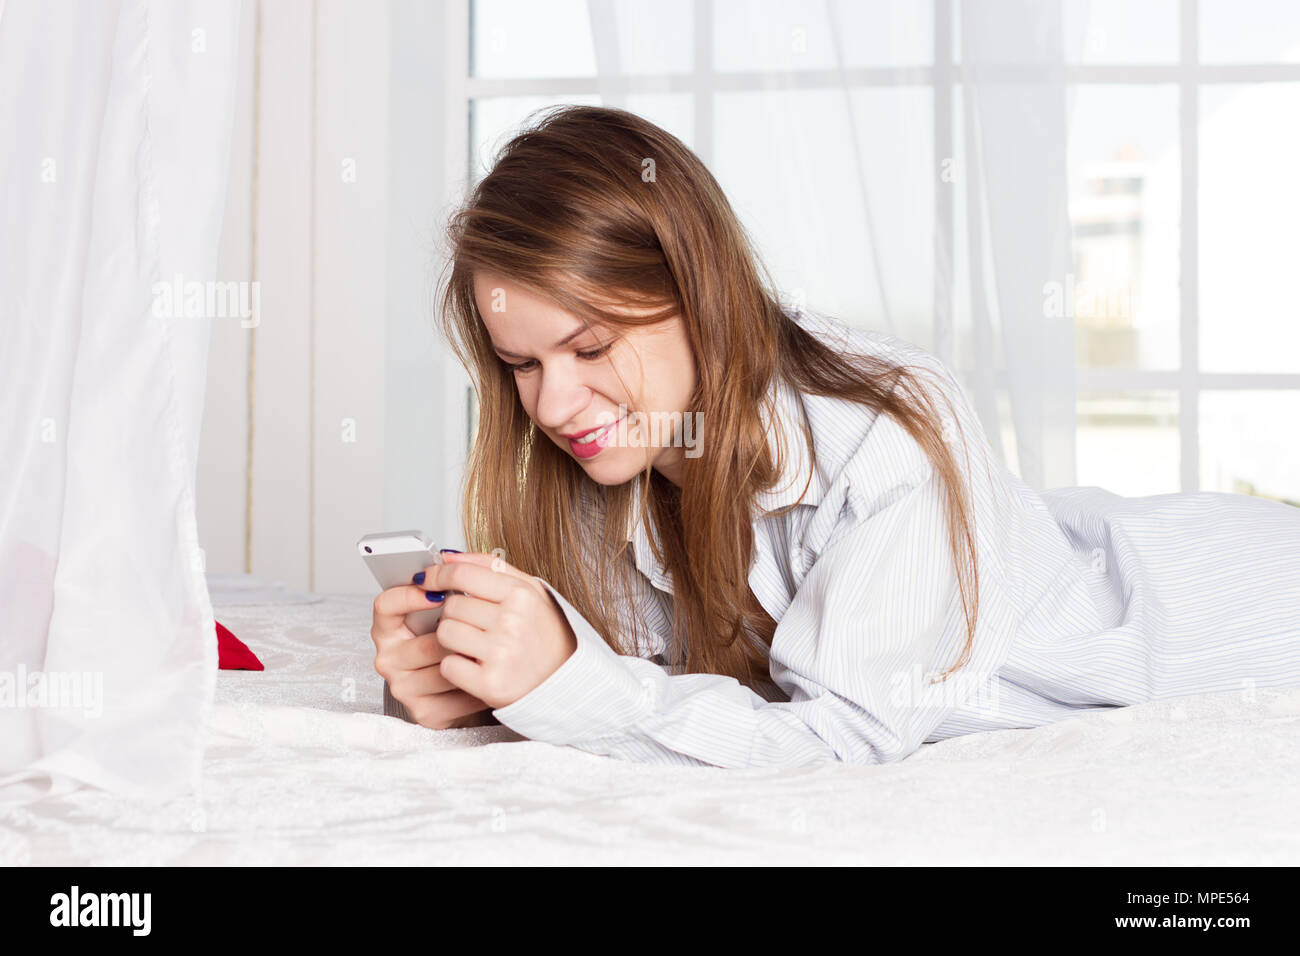 girl lies in a man's shirt on the bed with a smartphone in the hands of Stock Photo